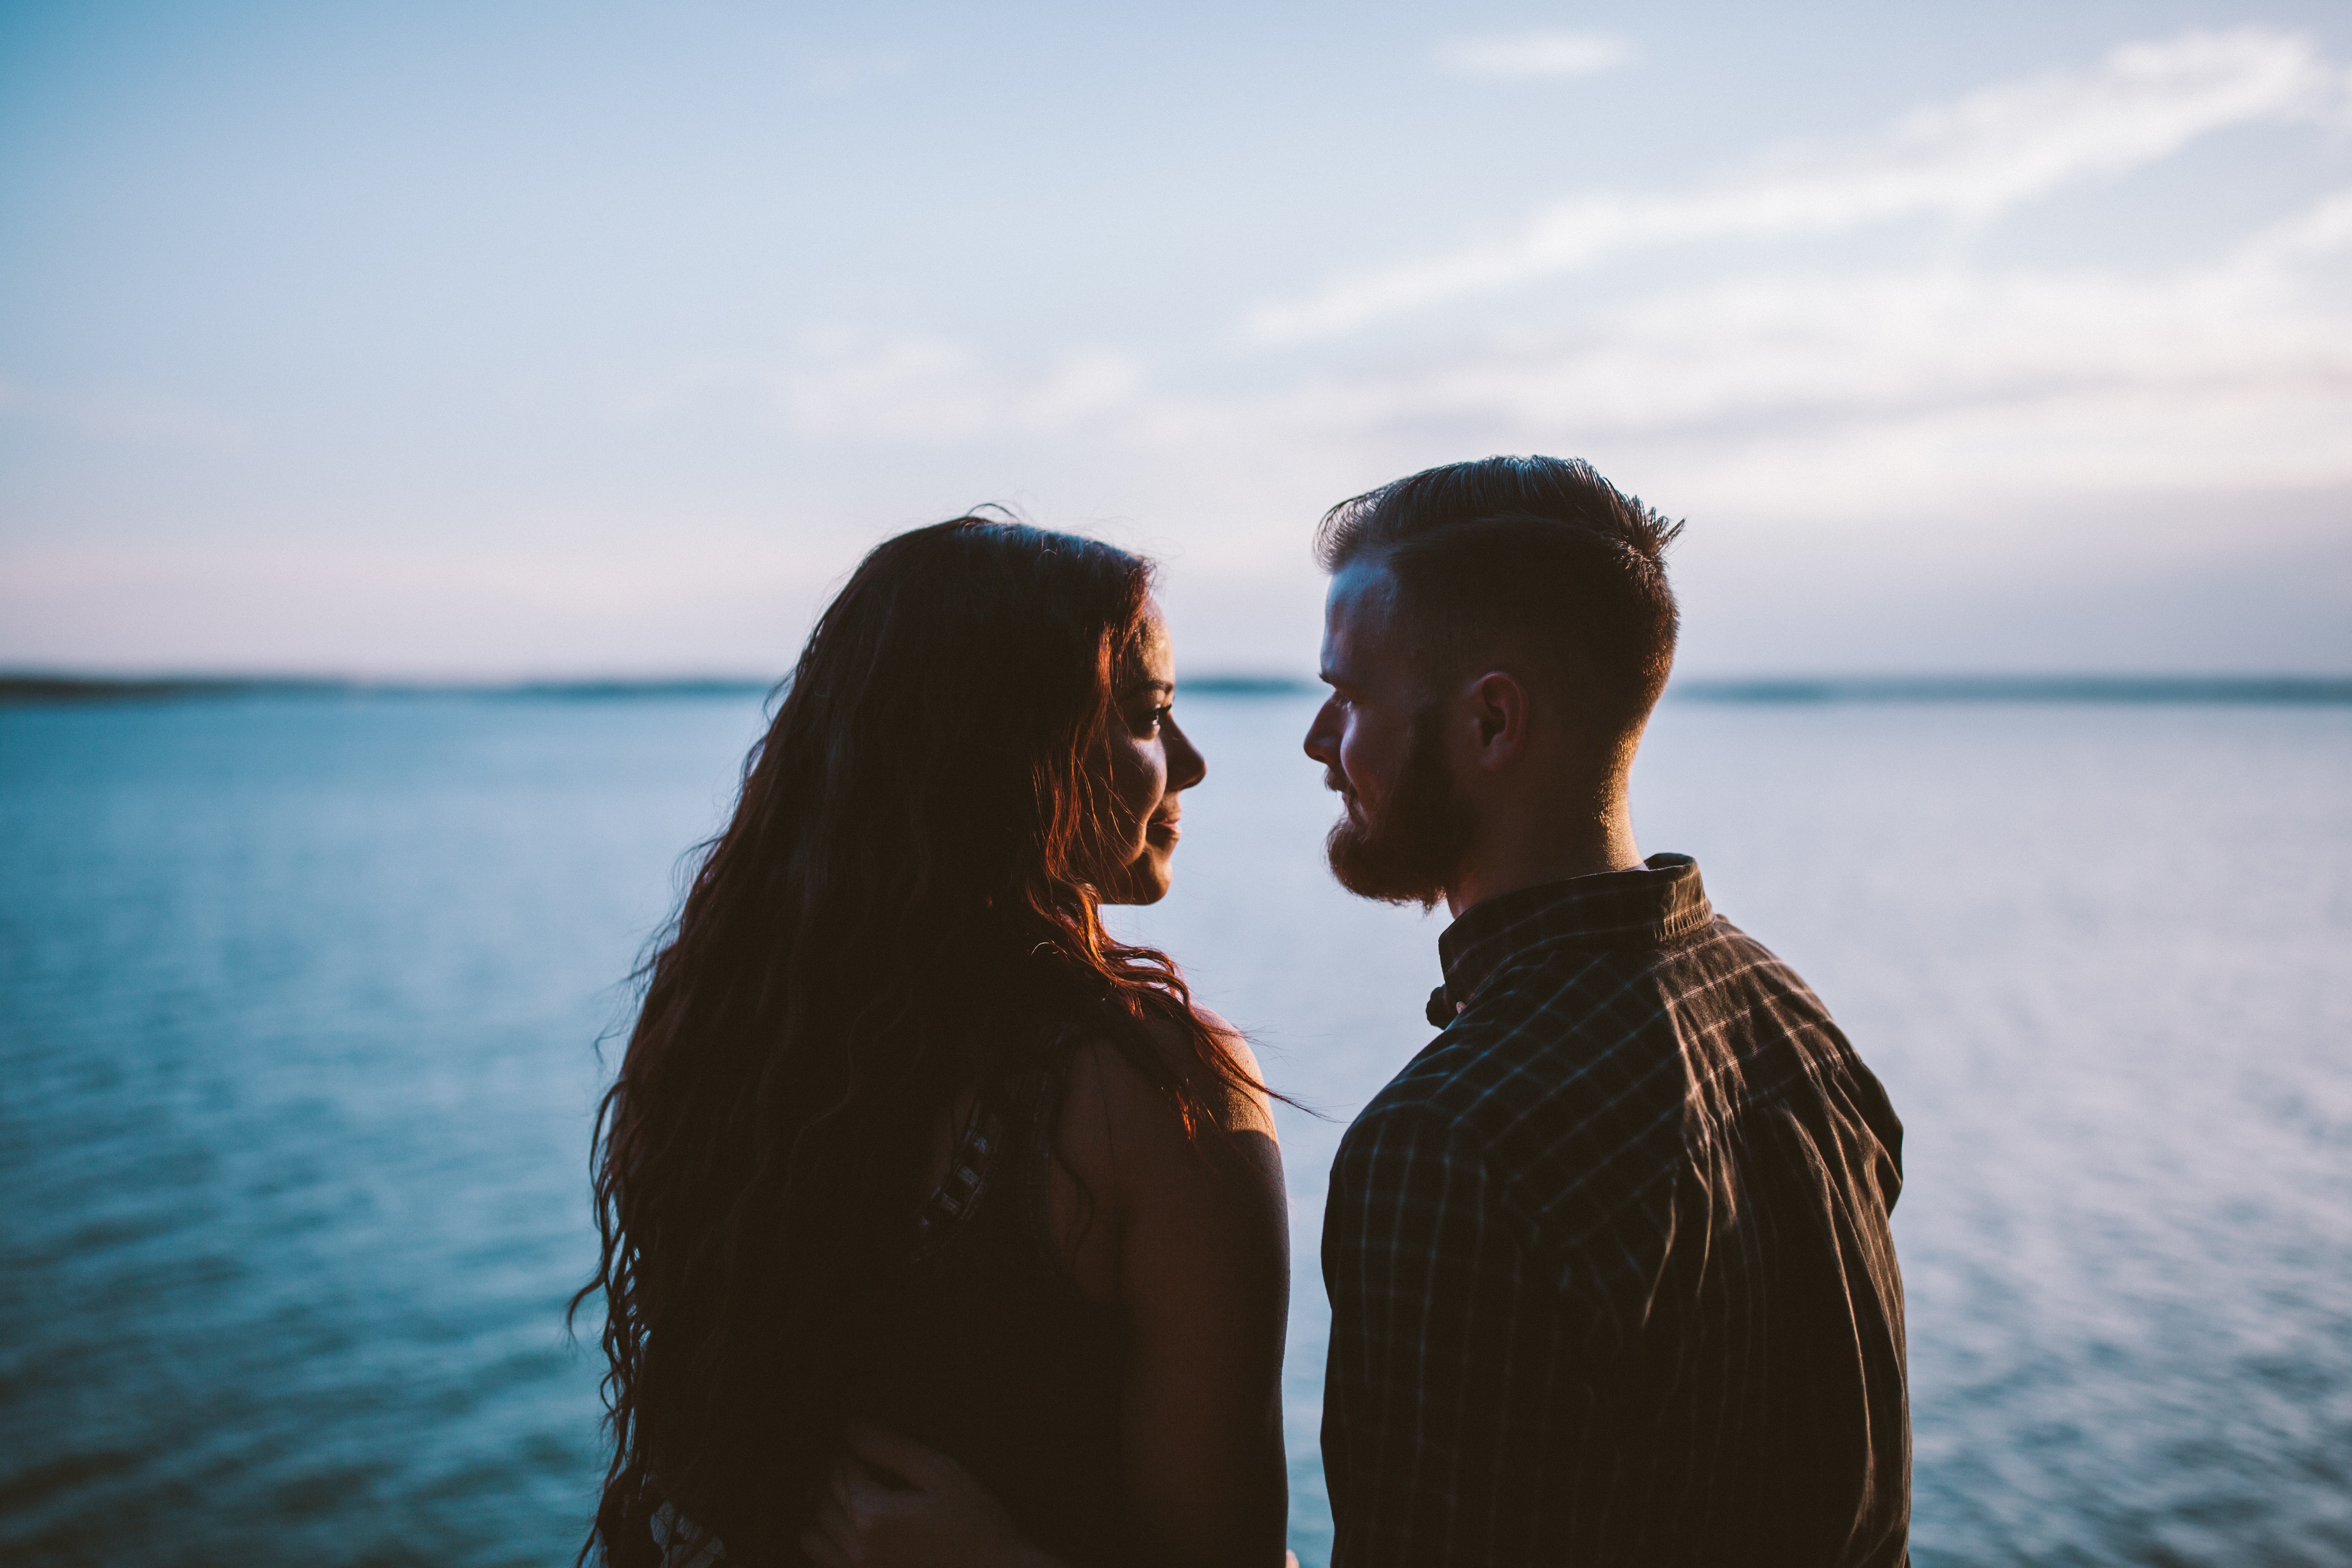 A couple looking at each other in front of the ocean. | Source: Unsplash